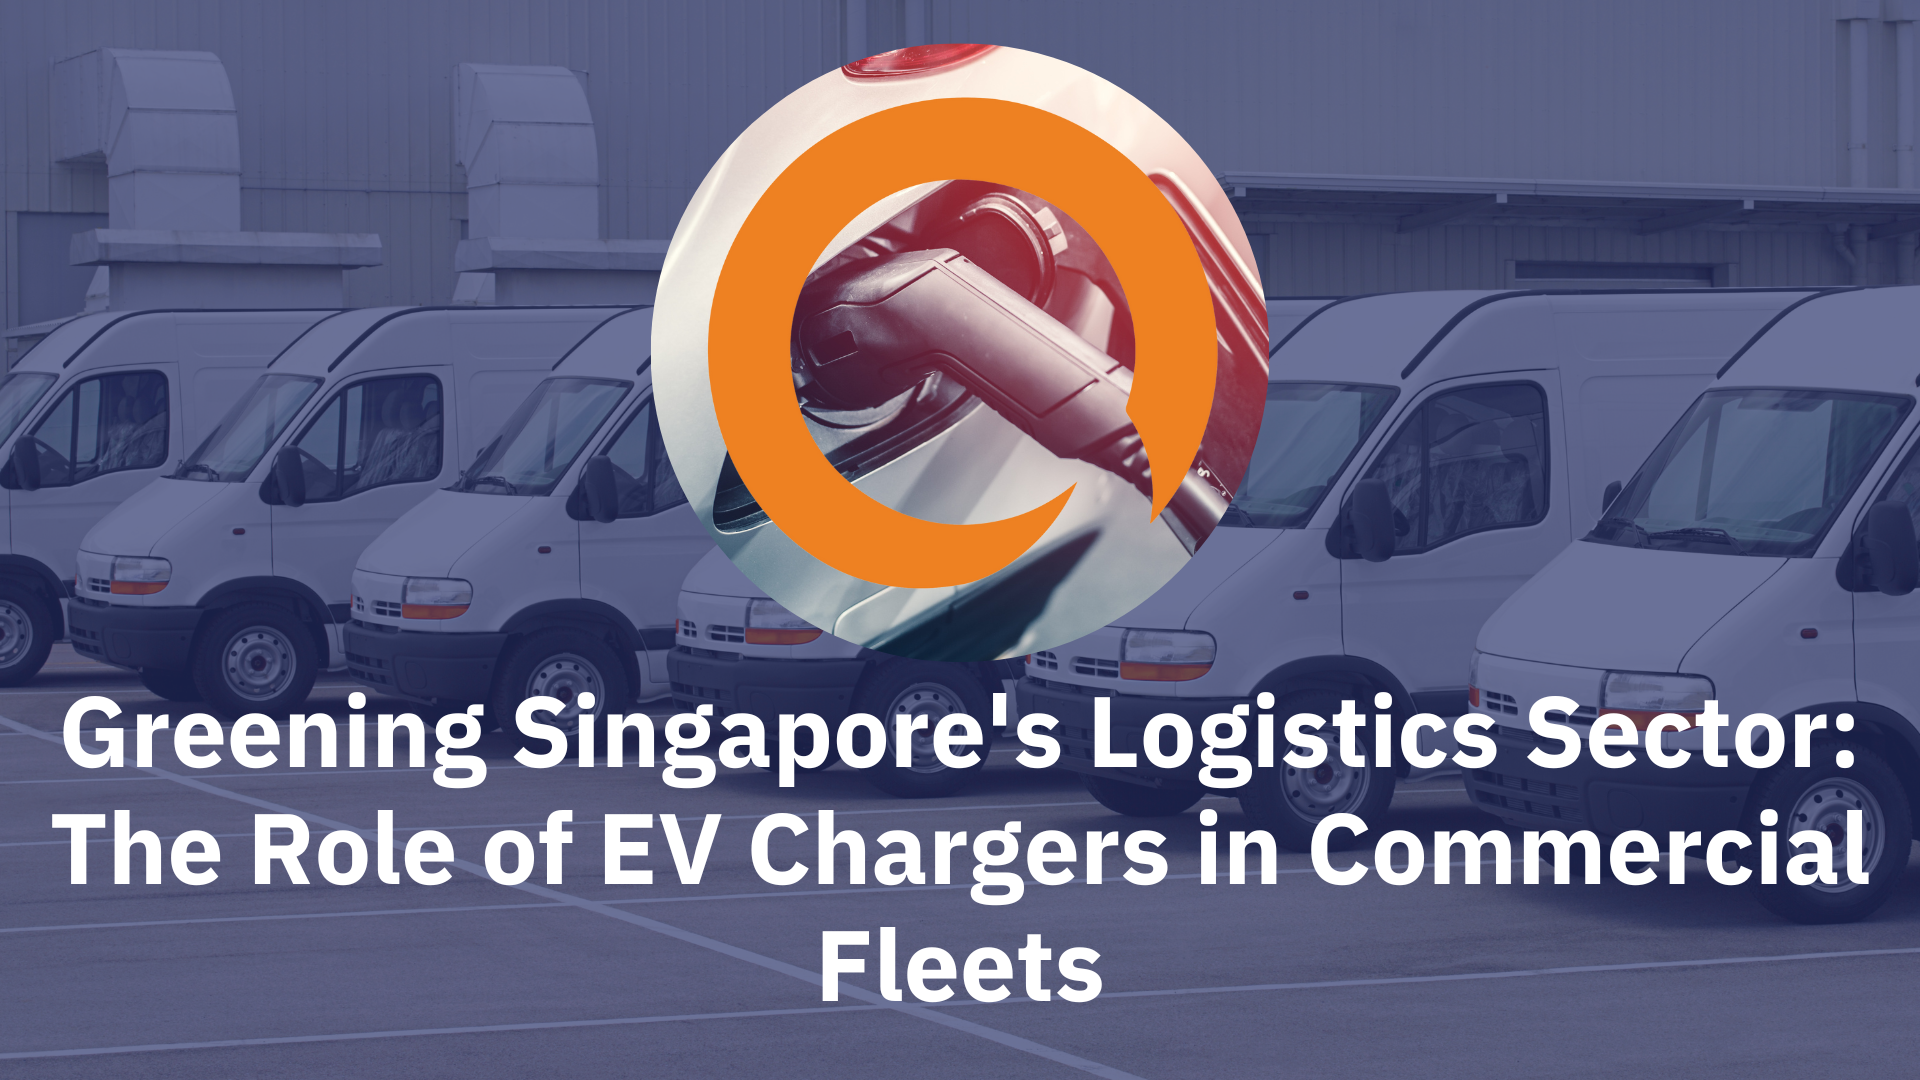 "Greening Singapore's Logistics Sector: The Role of EV Chargers in Commercial Fleets